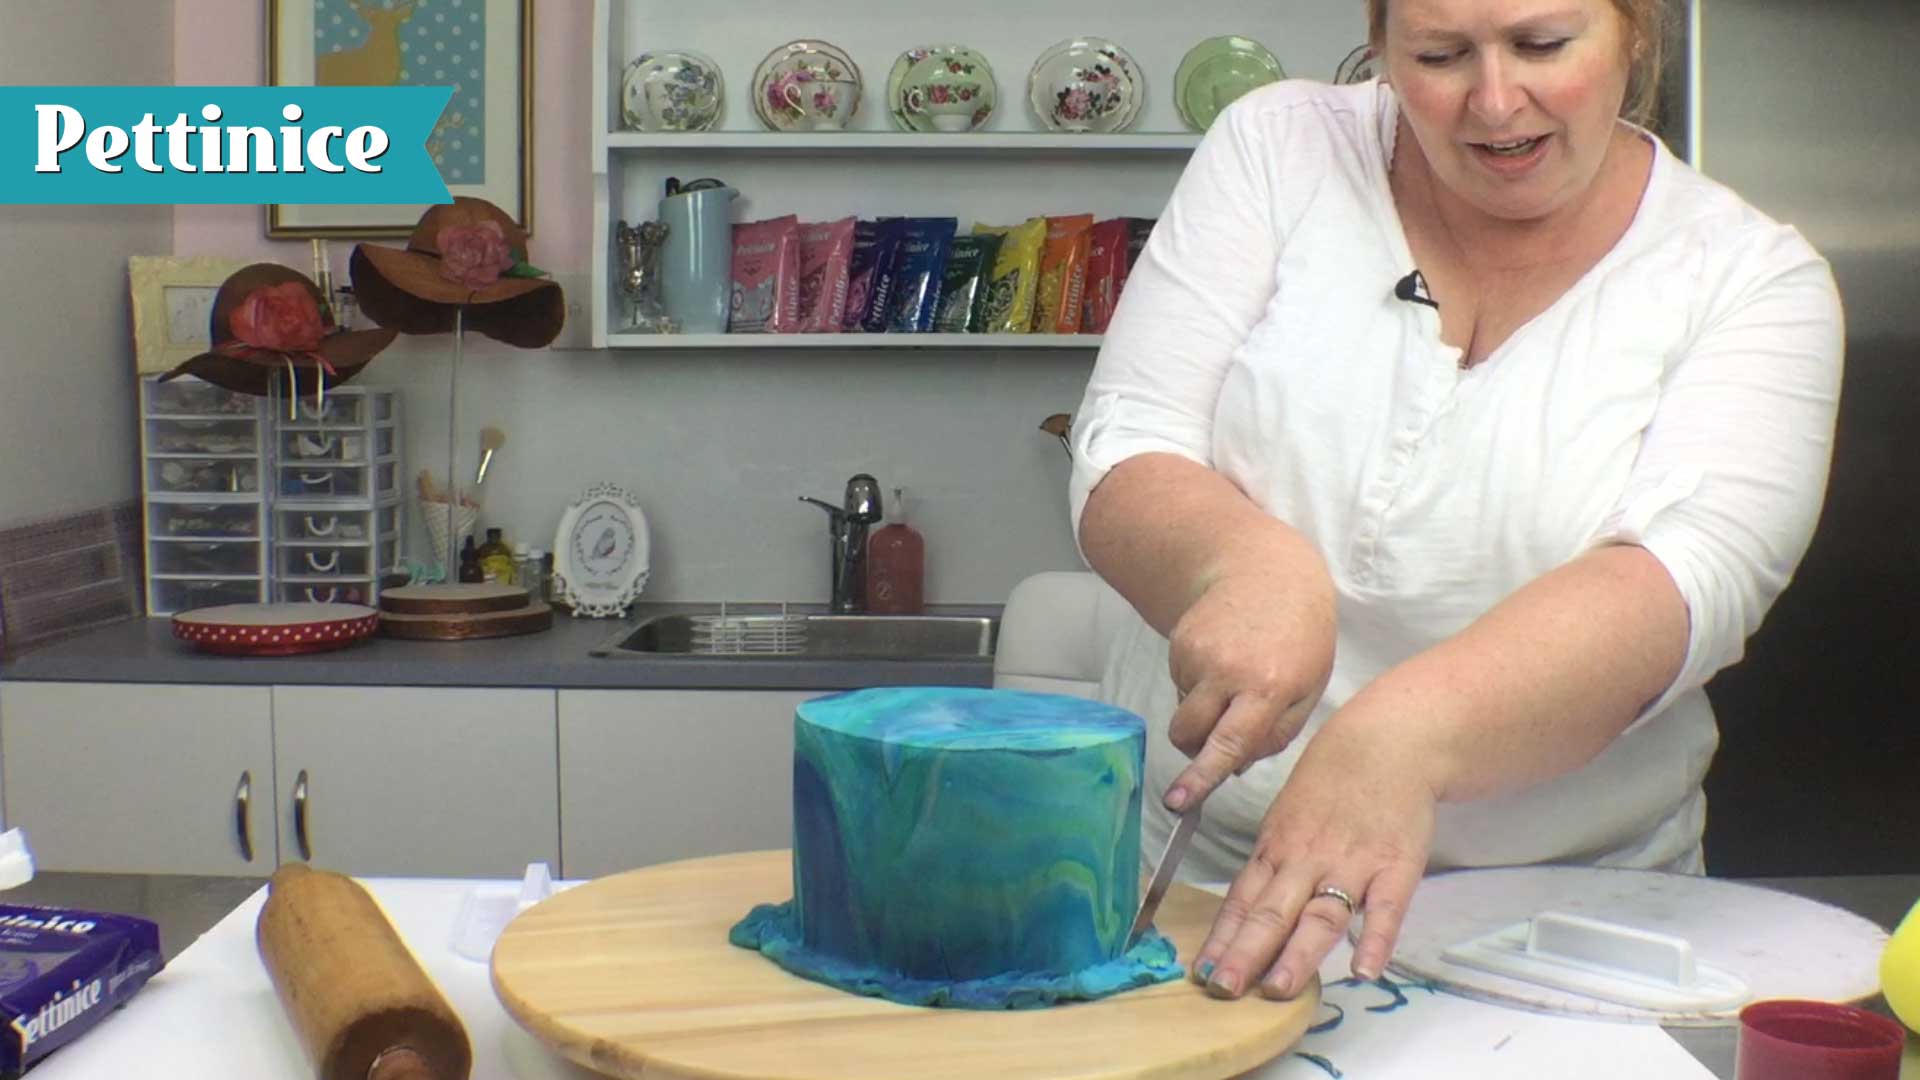 Keeping your knife at a 90 degree angle, trim away excess fondant.